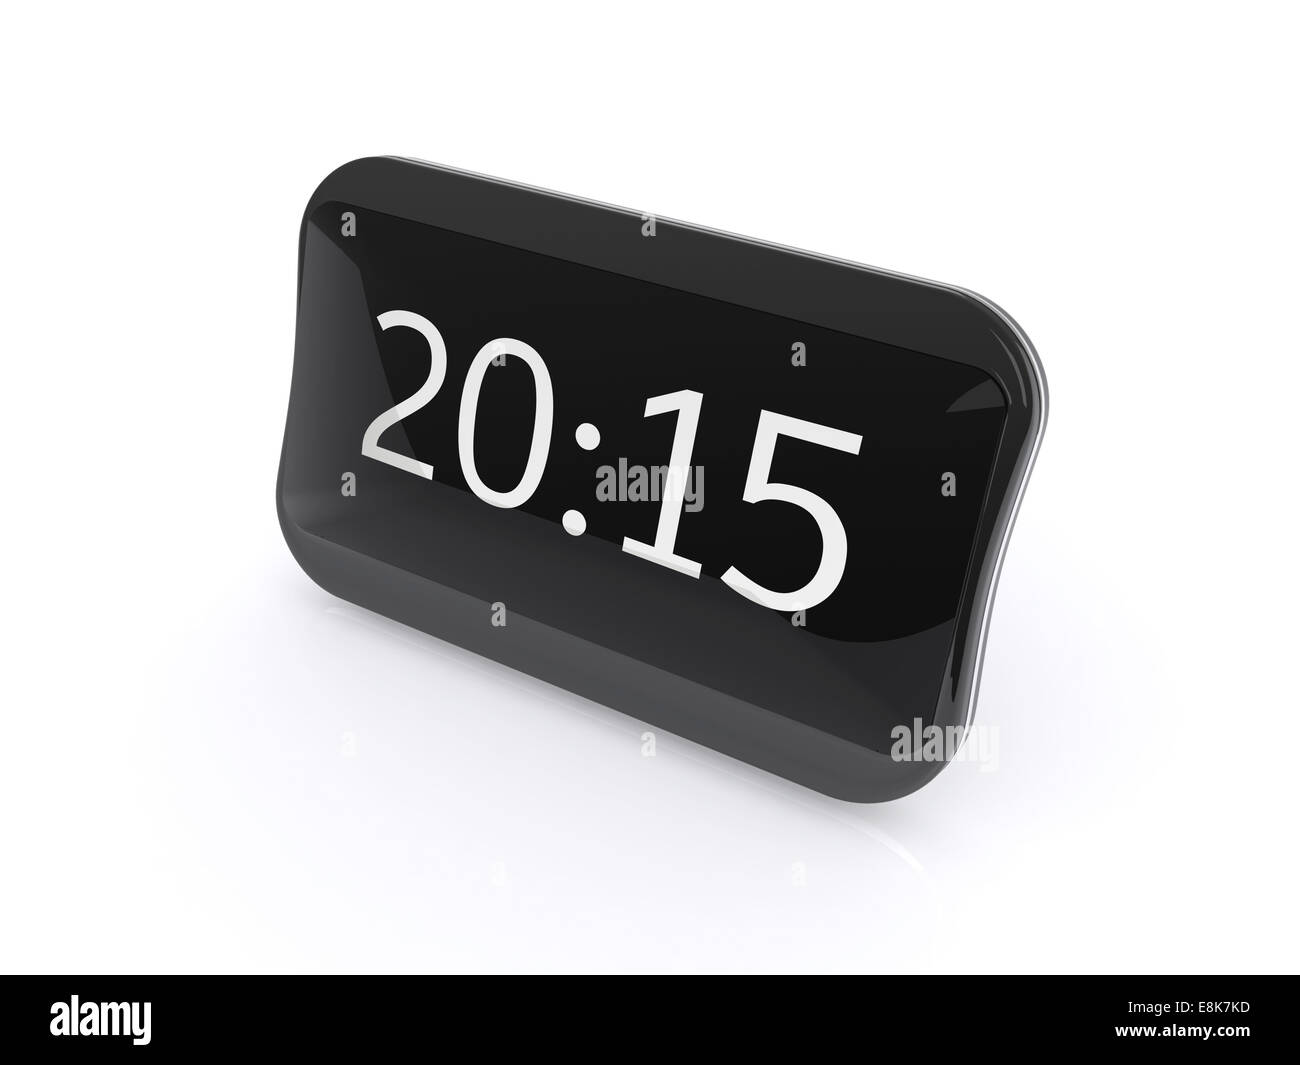 New black shining digital clock isolated on white background with 2015 text Stock Photo